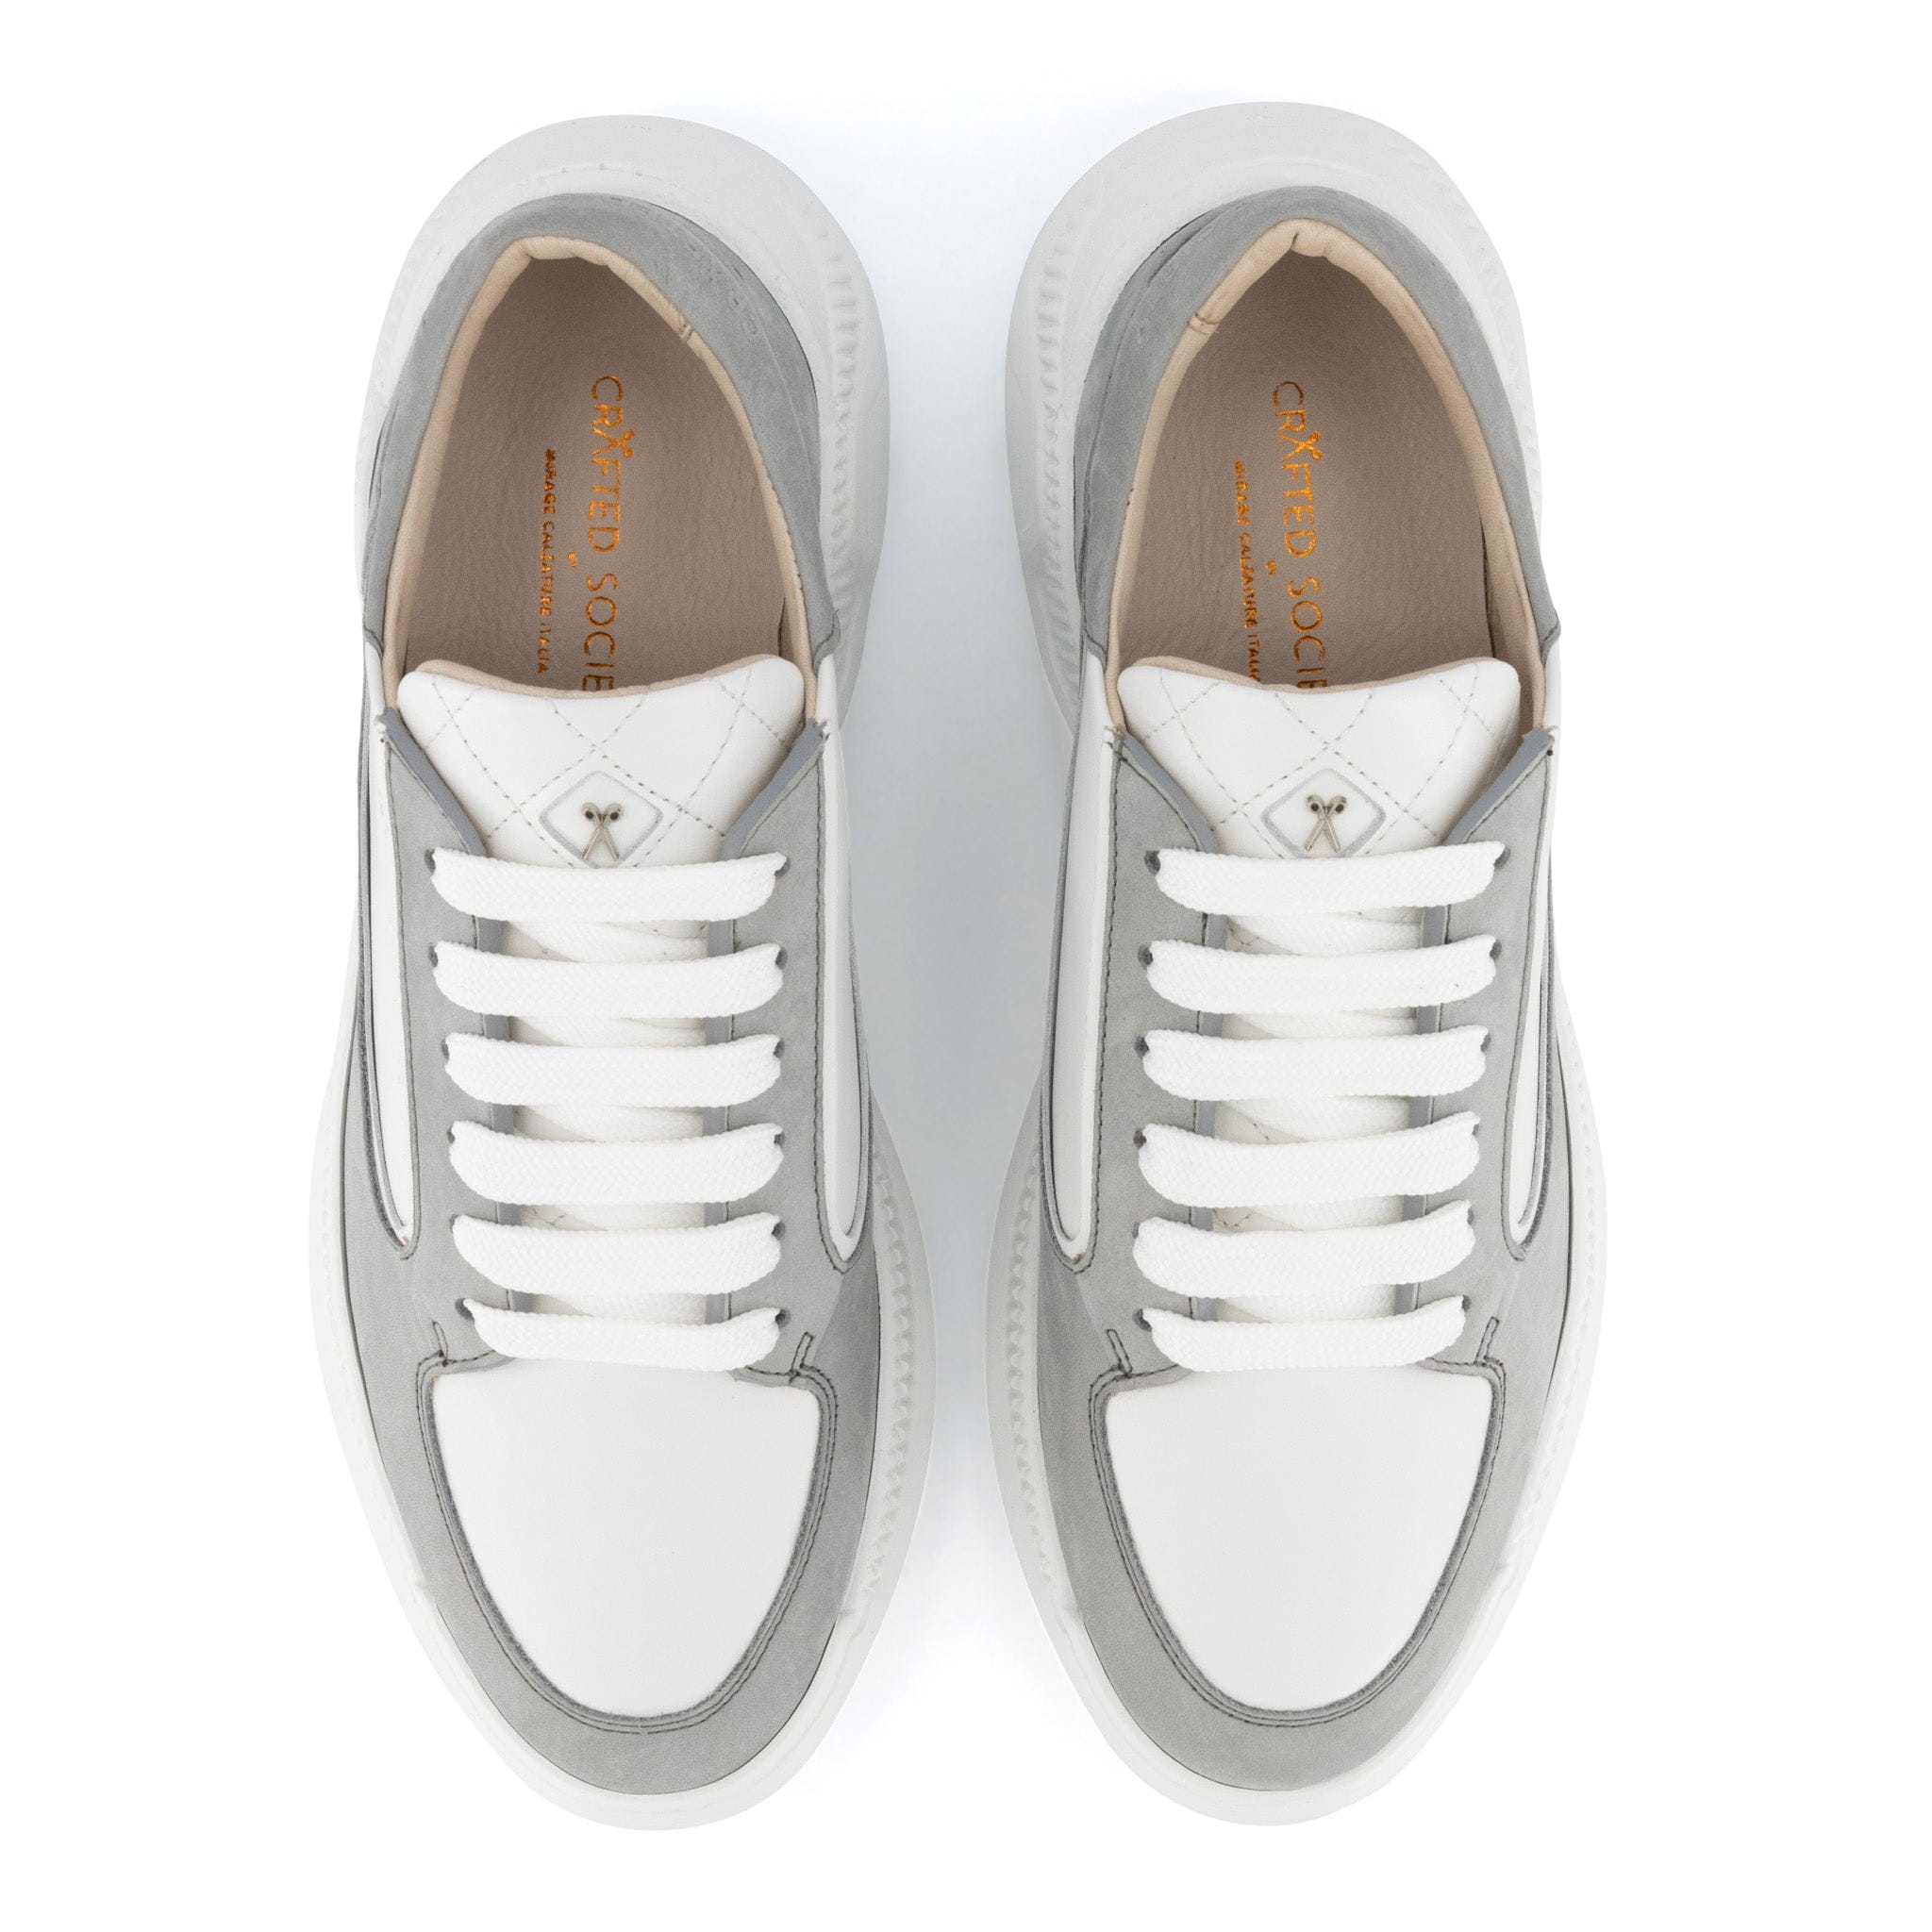 Nesto Low Top Italian Leather Sneaker | Light Grey and White | Made in Italy